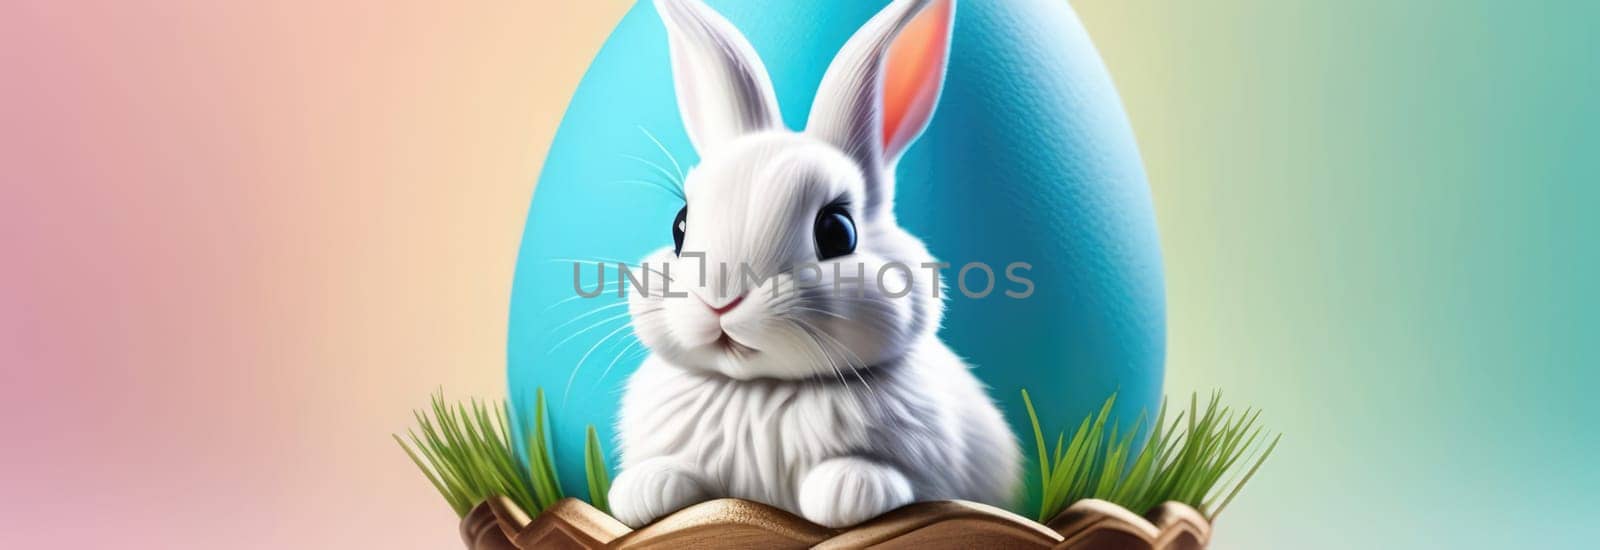 Easter banner with cute Easter bunny hatching from pastel color Easter egg on pastel color background. Illustration of Easter rabbit sitting in cracked eggshell. Happy Easter greeting card. Copy space